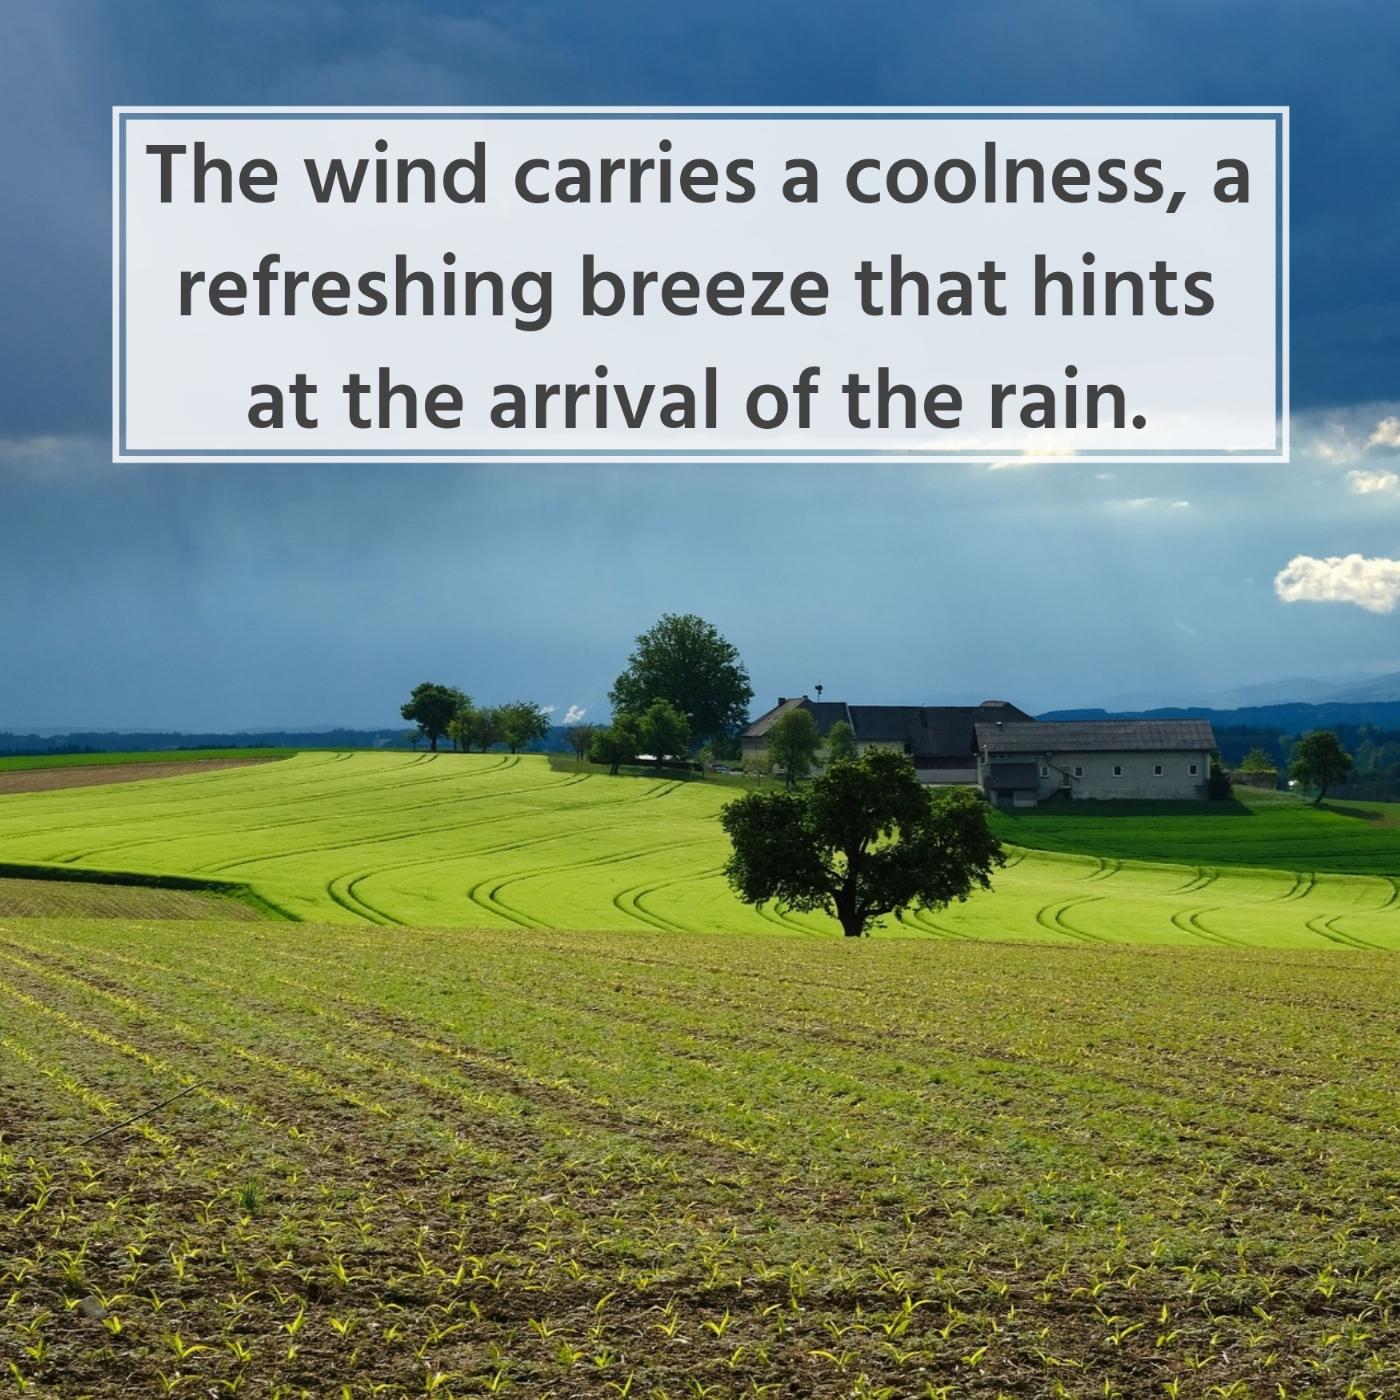 The wind carries a coolness a refreshing breeze